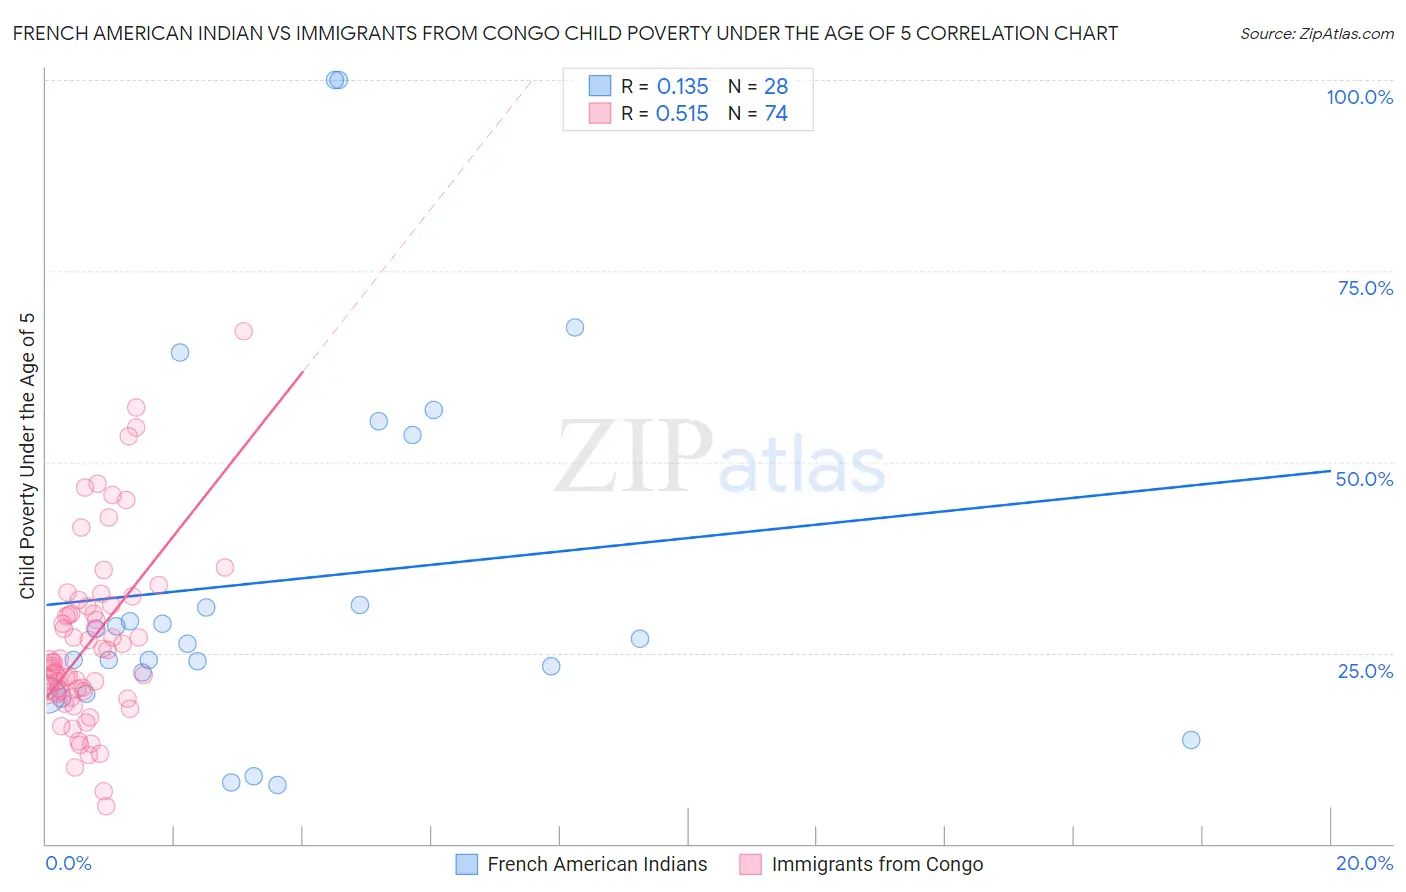 French American Indian vs Immigrants from Congo Child Poverty Under the Age of 5